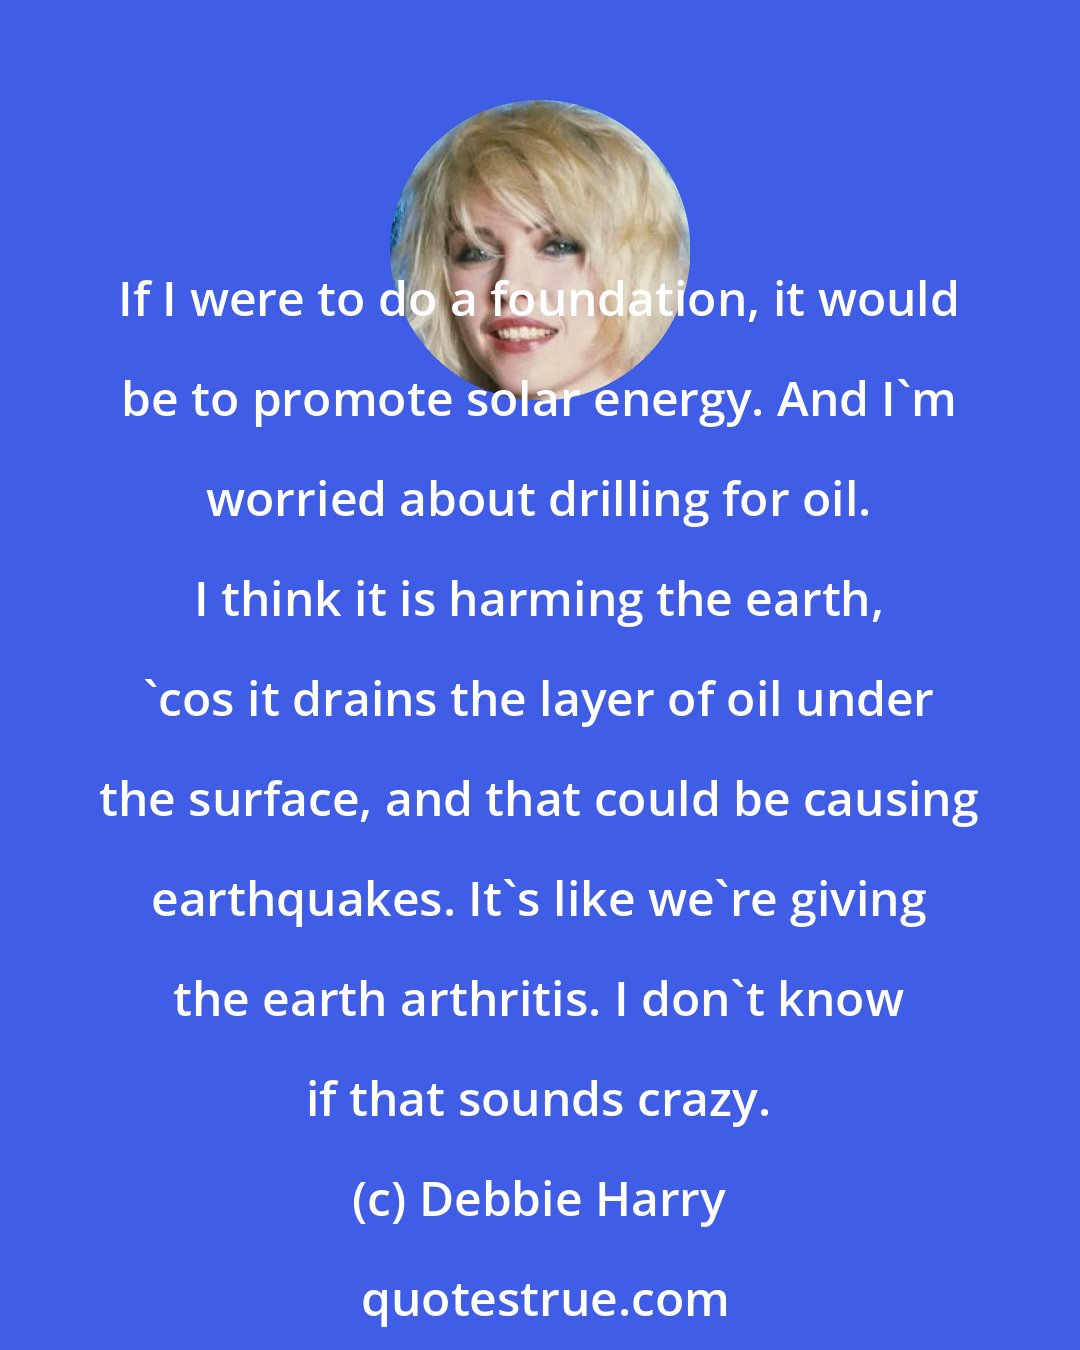 Debbie Harry: If I were to do a foundation, it would be to promote solar energy. And I'm worried about drilling for oil. I think it is harming the earth, 'cos it drains the layer of oil under the surface, and that could be causing earthquakes. It's like we're giving the earth arthritis. I don't know if that sounds crazy.